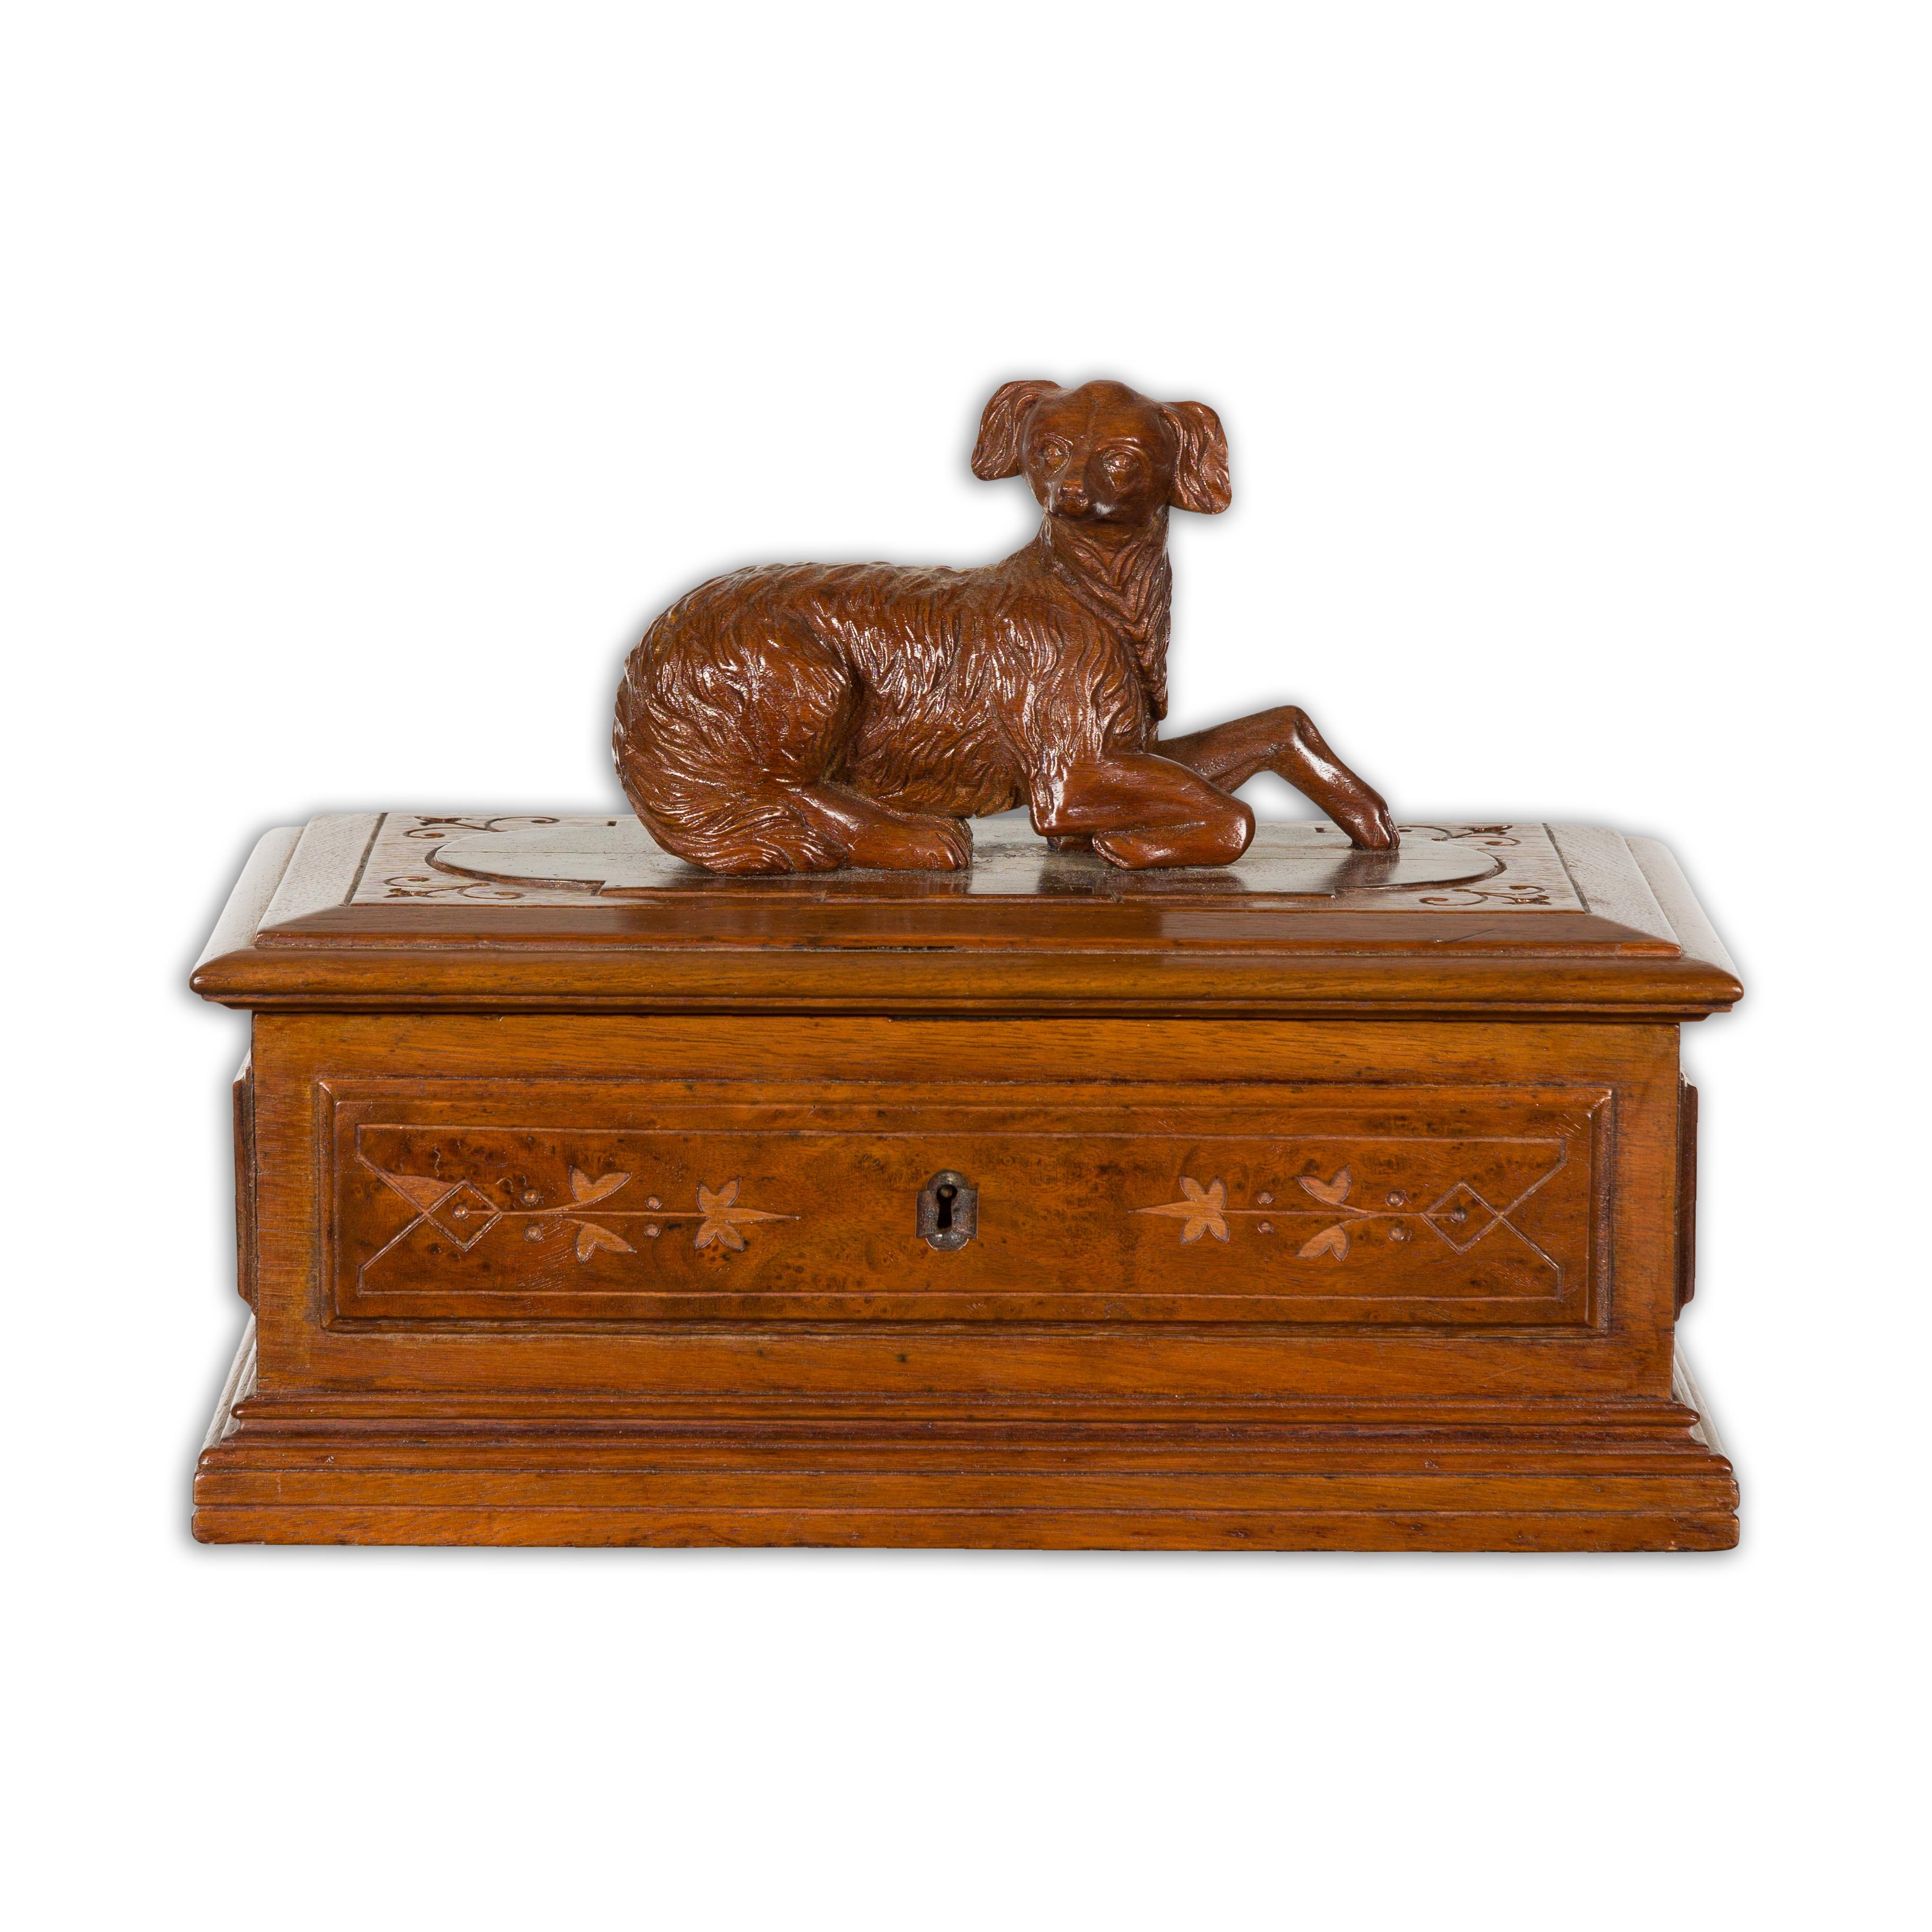 19th Century English Oak Decorative Box with Dog Carving For Sale 13